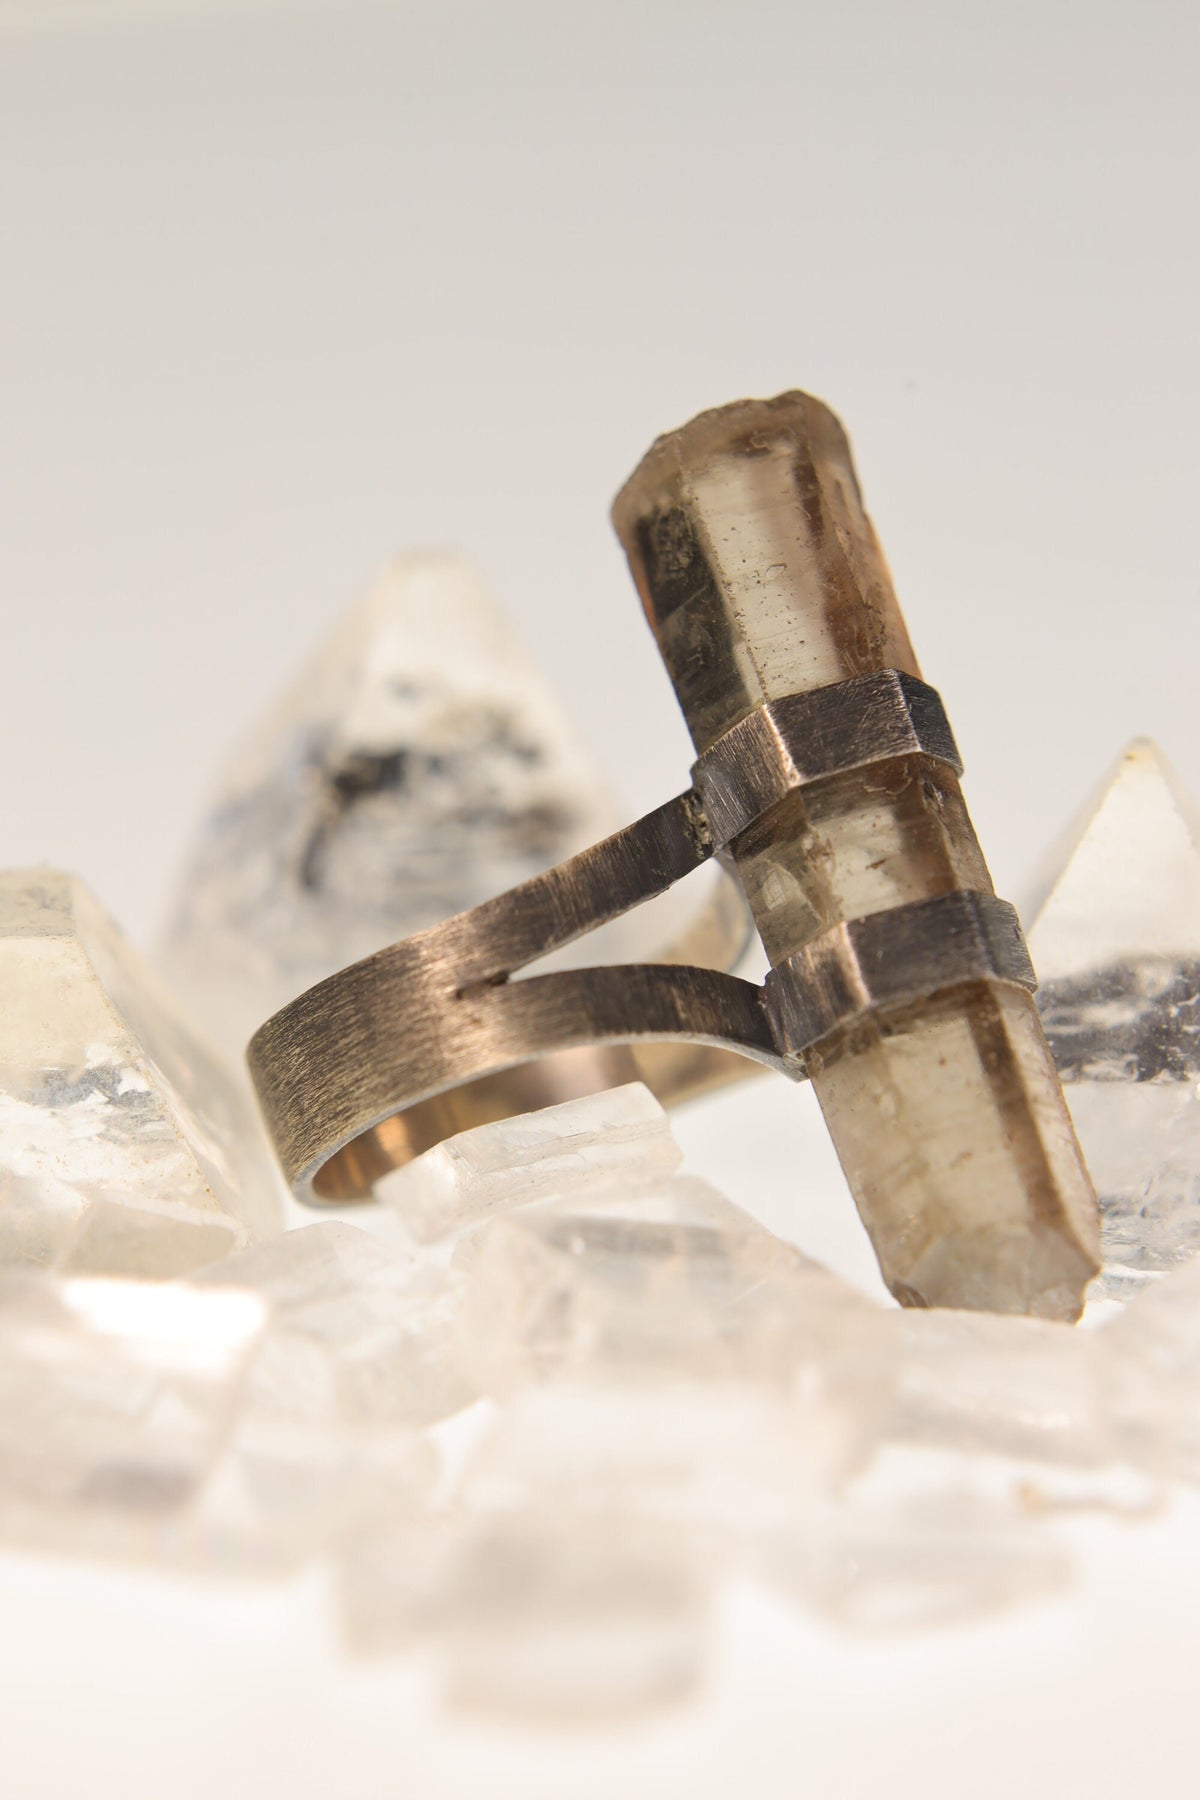 Torrington Radiance: Textured & Oxidised Sterling Silver Ring with Natural Australian Smoky Citrine Quartz - Size 9 - NO/03